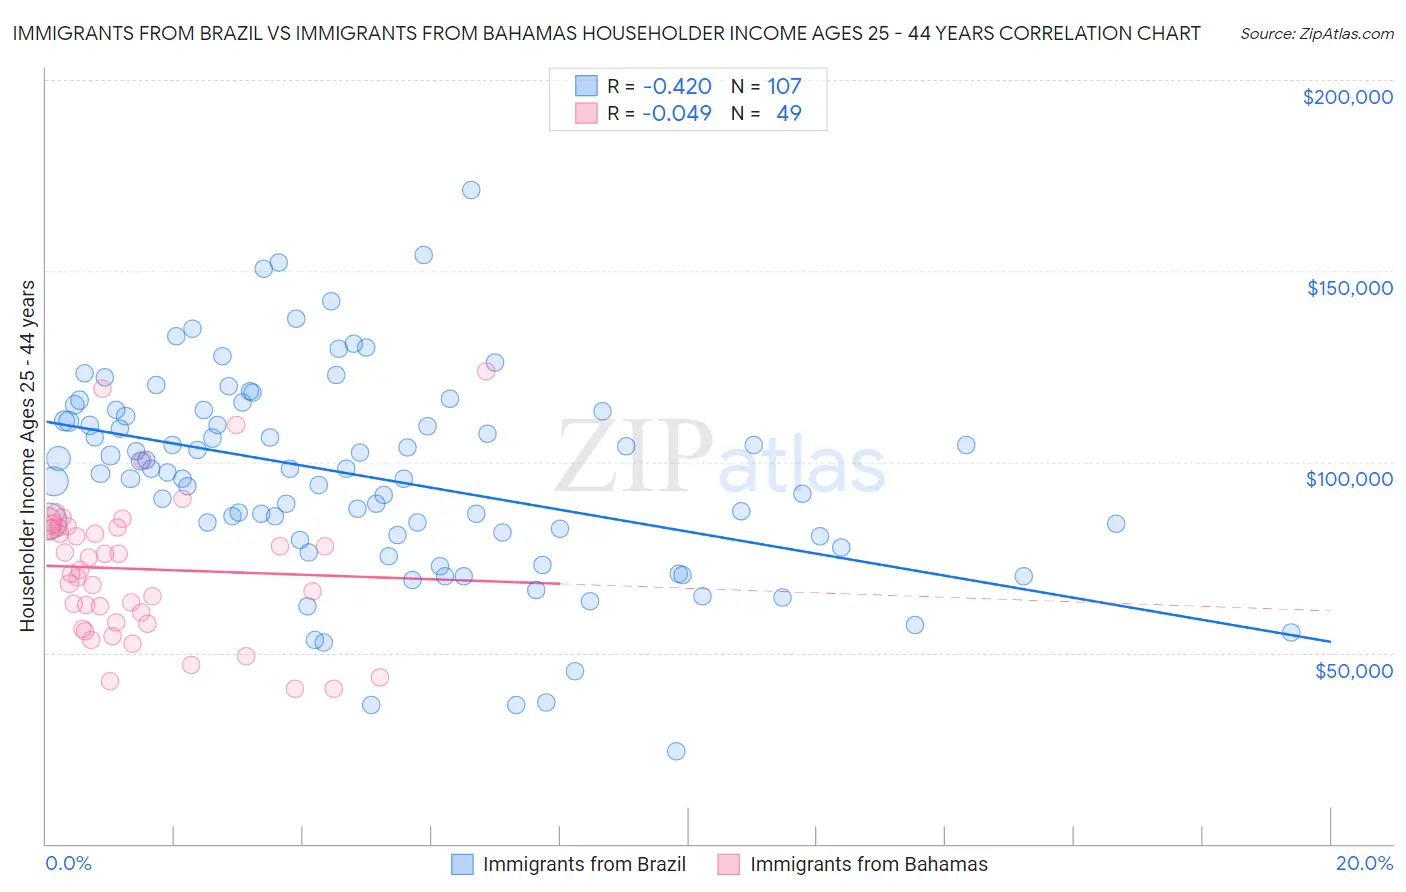 Immigrants from Brazil vs Immigrants from Bahamas Householder Income Ages 25 - 44 years